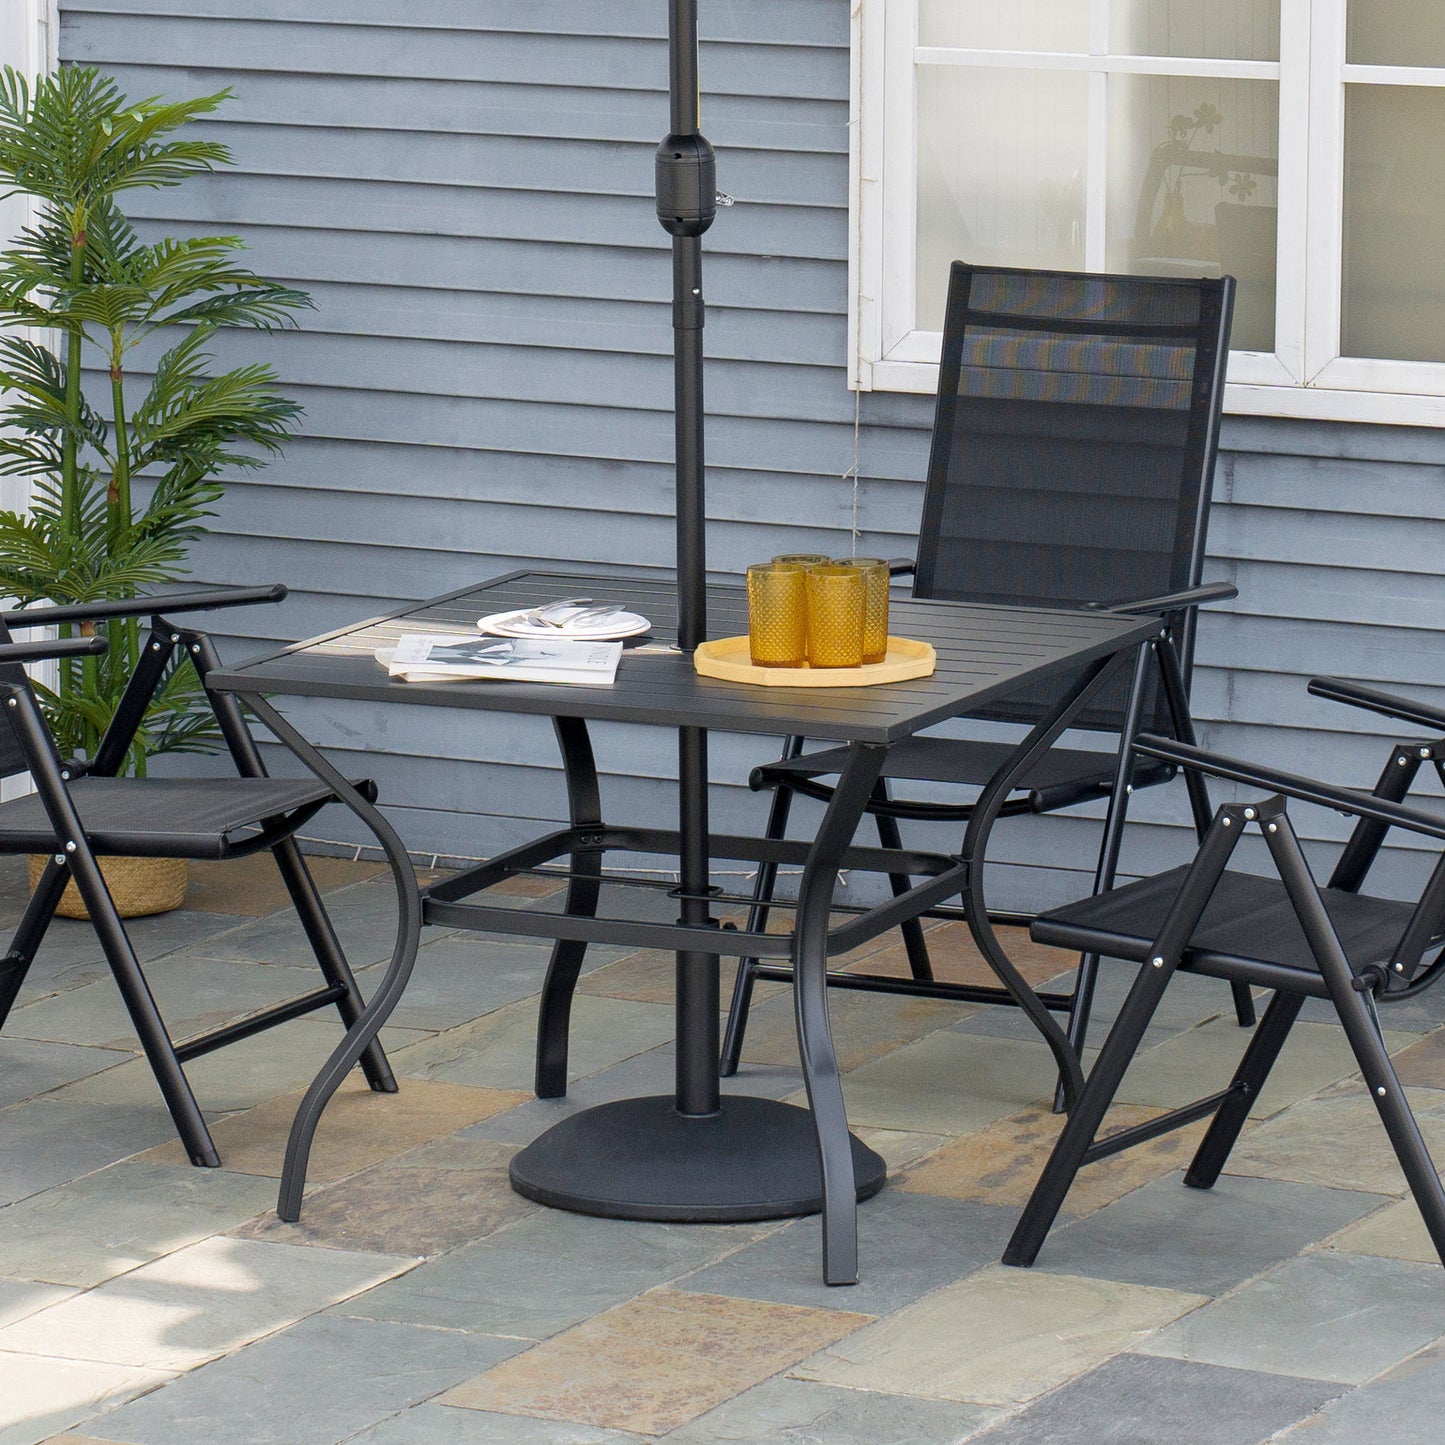 Outdoor Dining Table for Four, Patio Table with Parasol Hole, Square Garden Table with Slatted Metal Plate Top, for Backyard, Poolside, Black at Gallery Canada